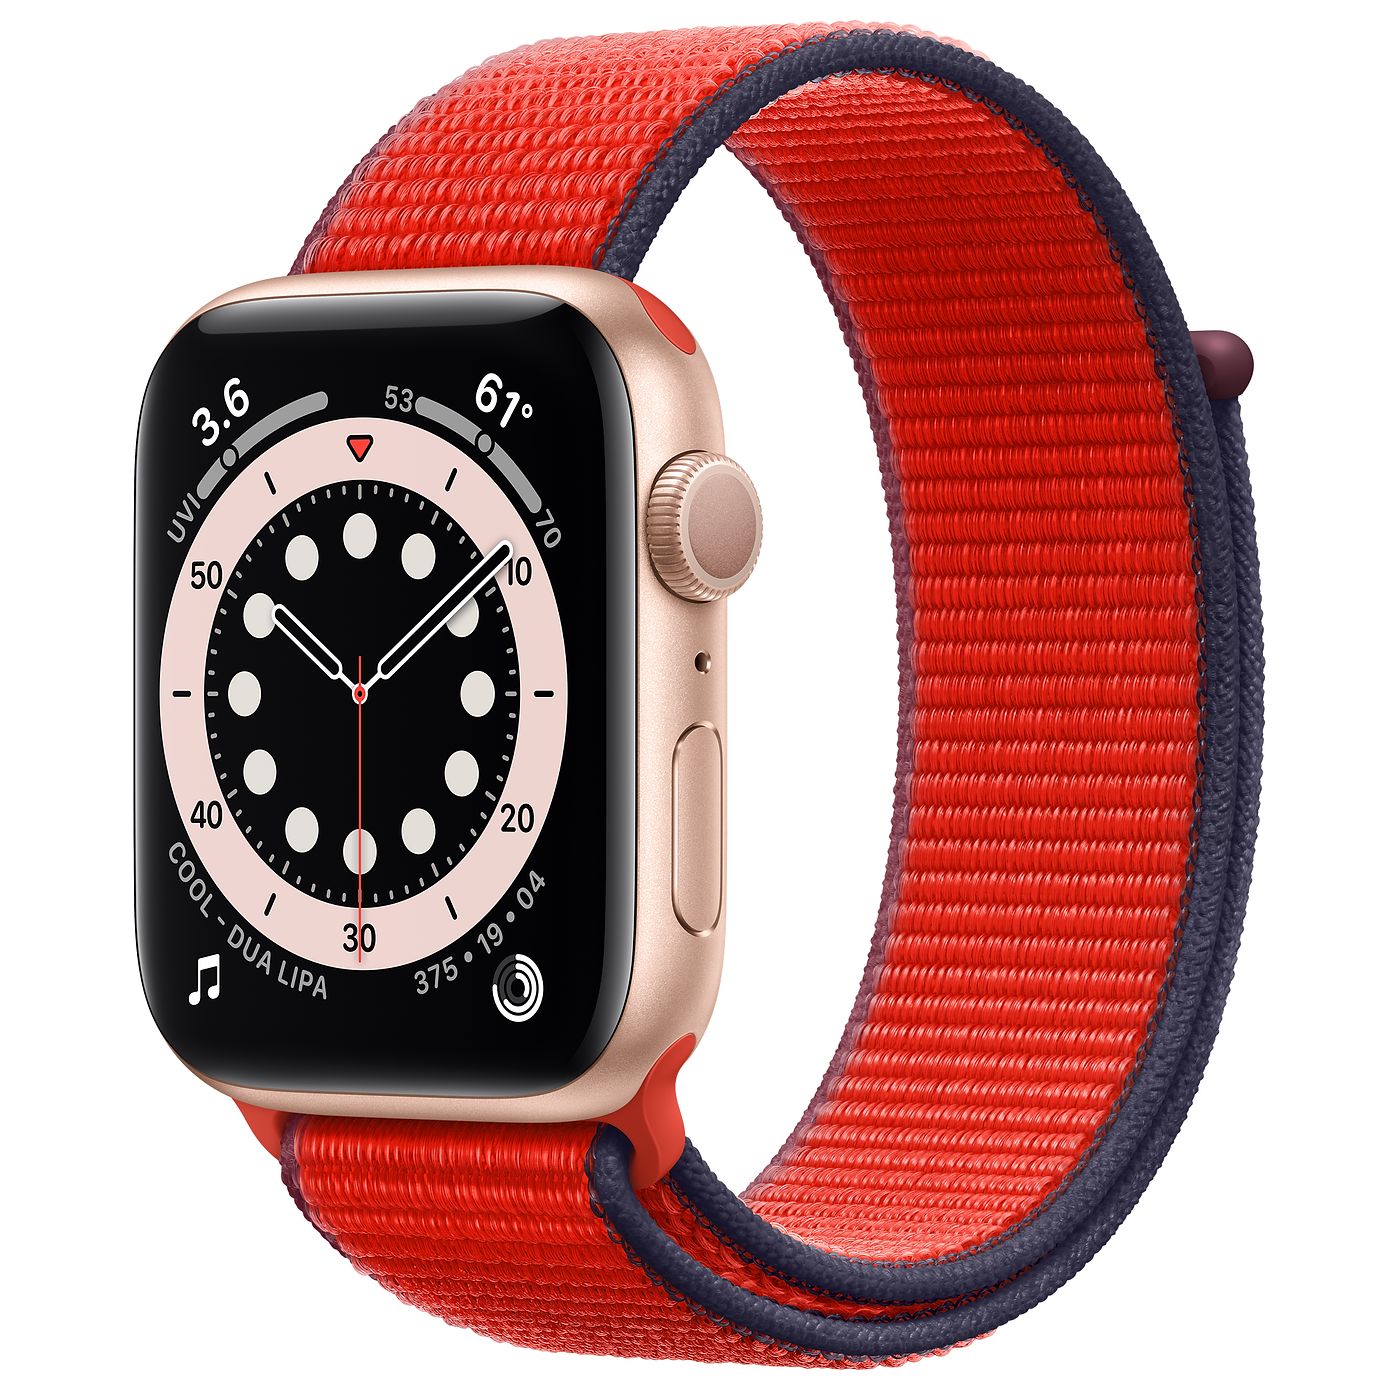 Apple Watch Series 6 GPS 44mm Gold Aluminum with Red Sport Loop ...